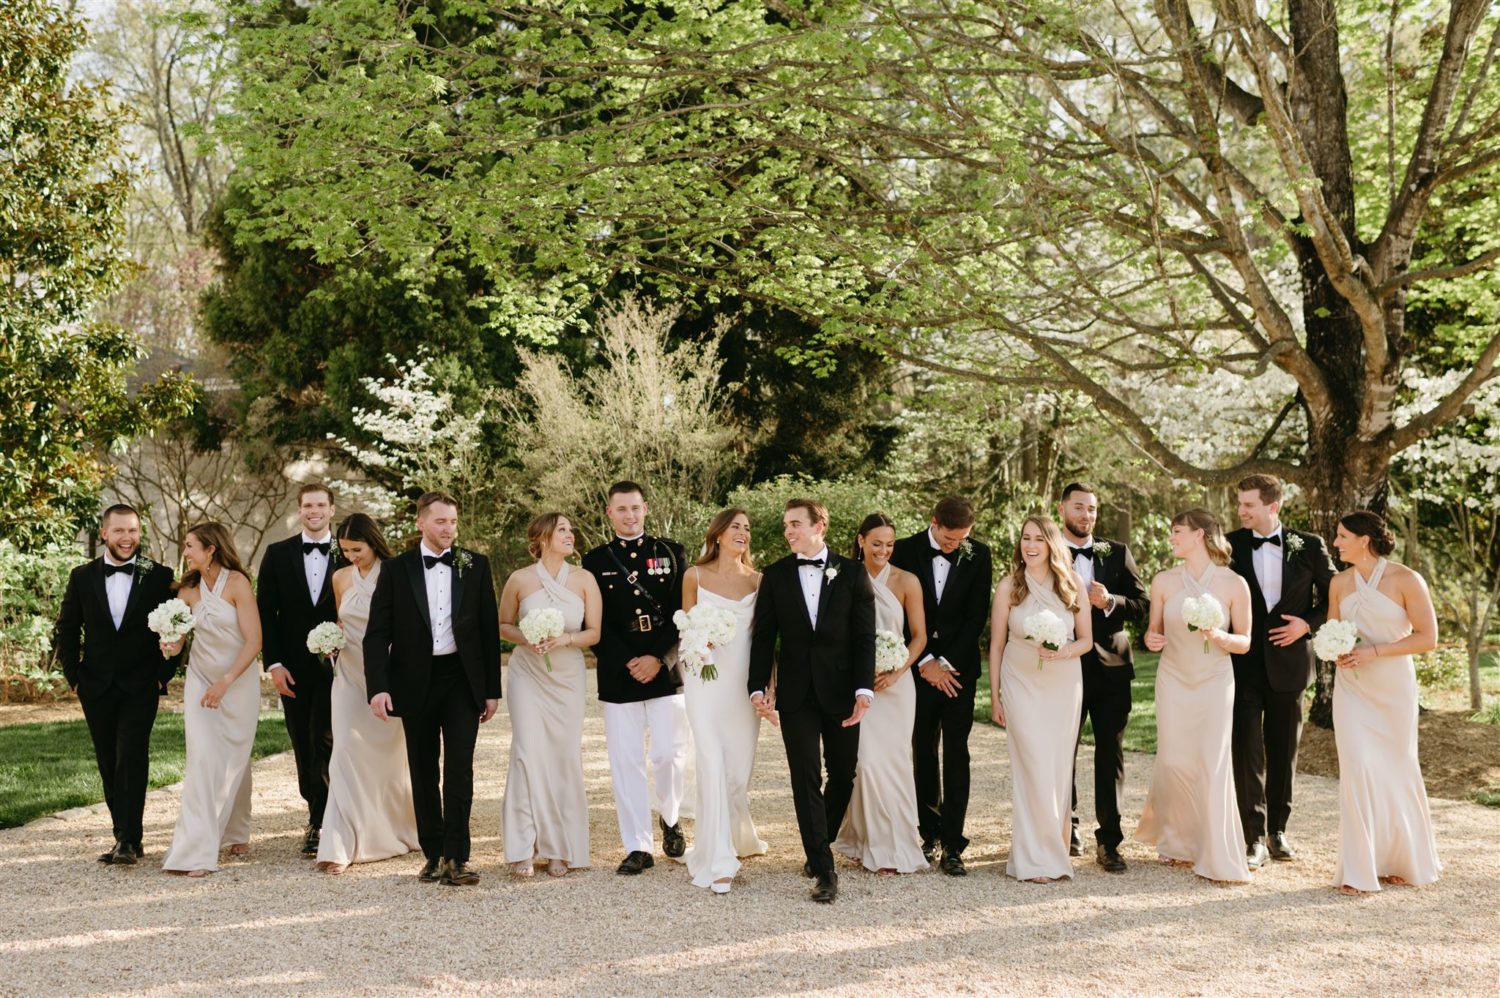 traditional bridal party attire champagne bridesmaids dresses white and black groomsmen tuxes